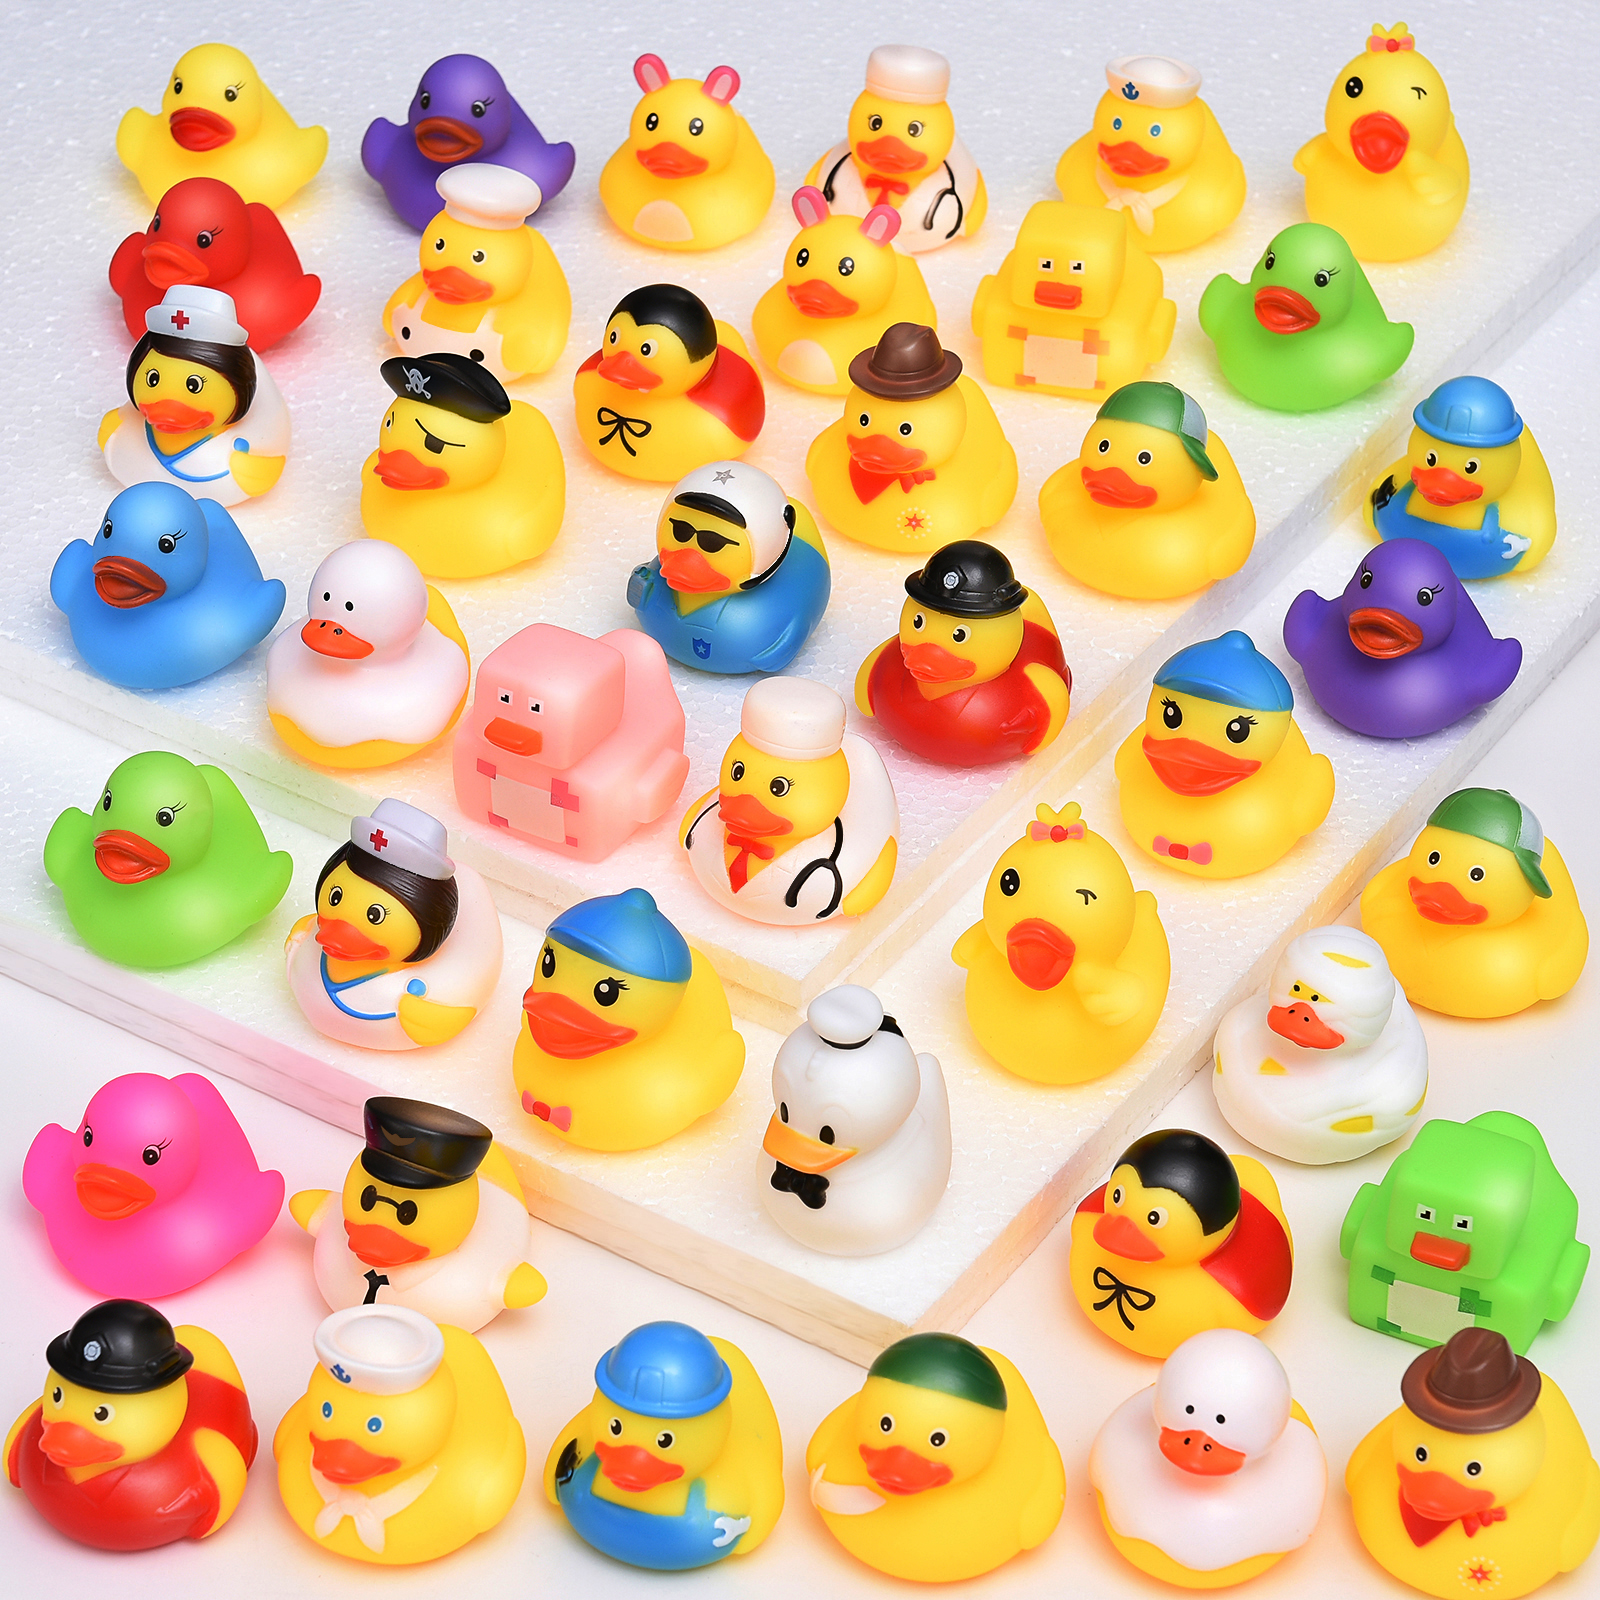 25pcs Assortment Rubber Ducks Bath Toys With Storage Net - Free Shipping